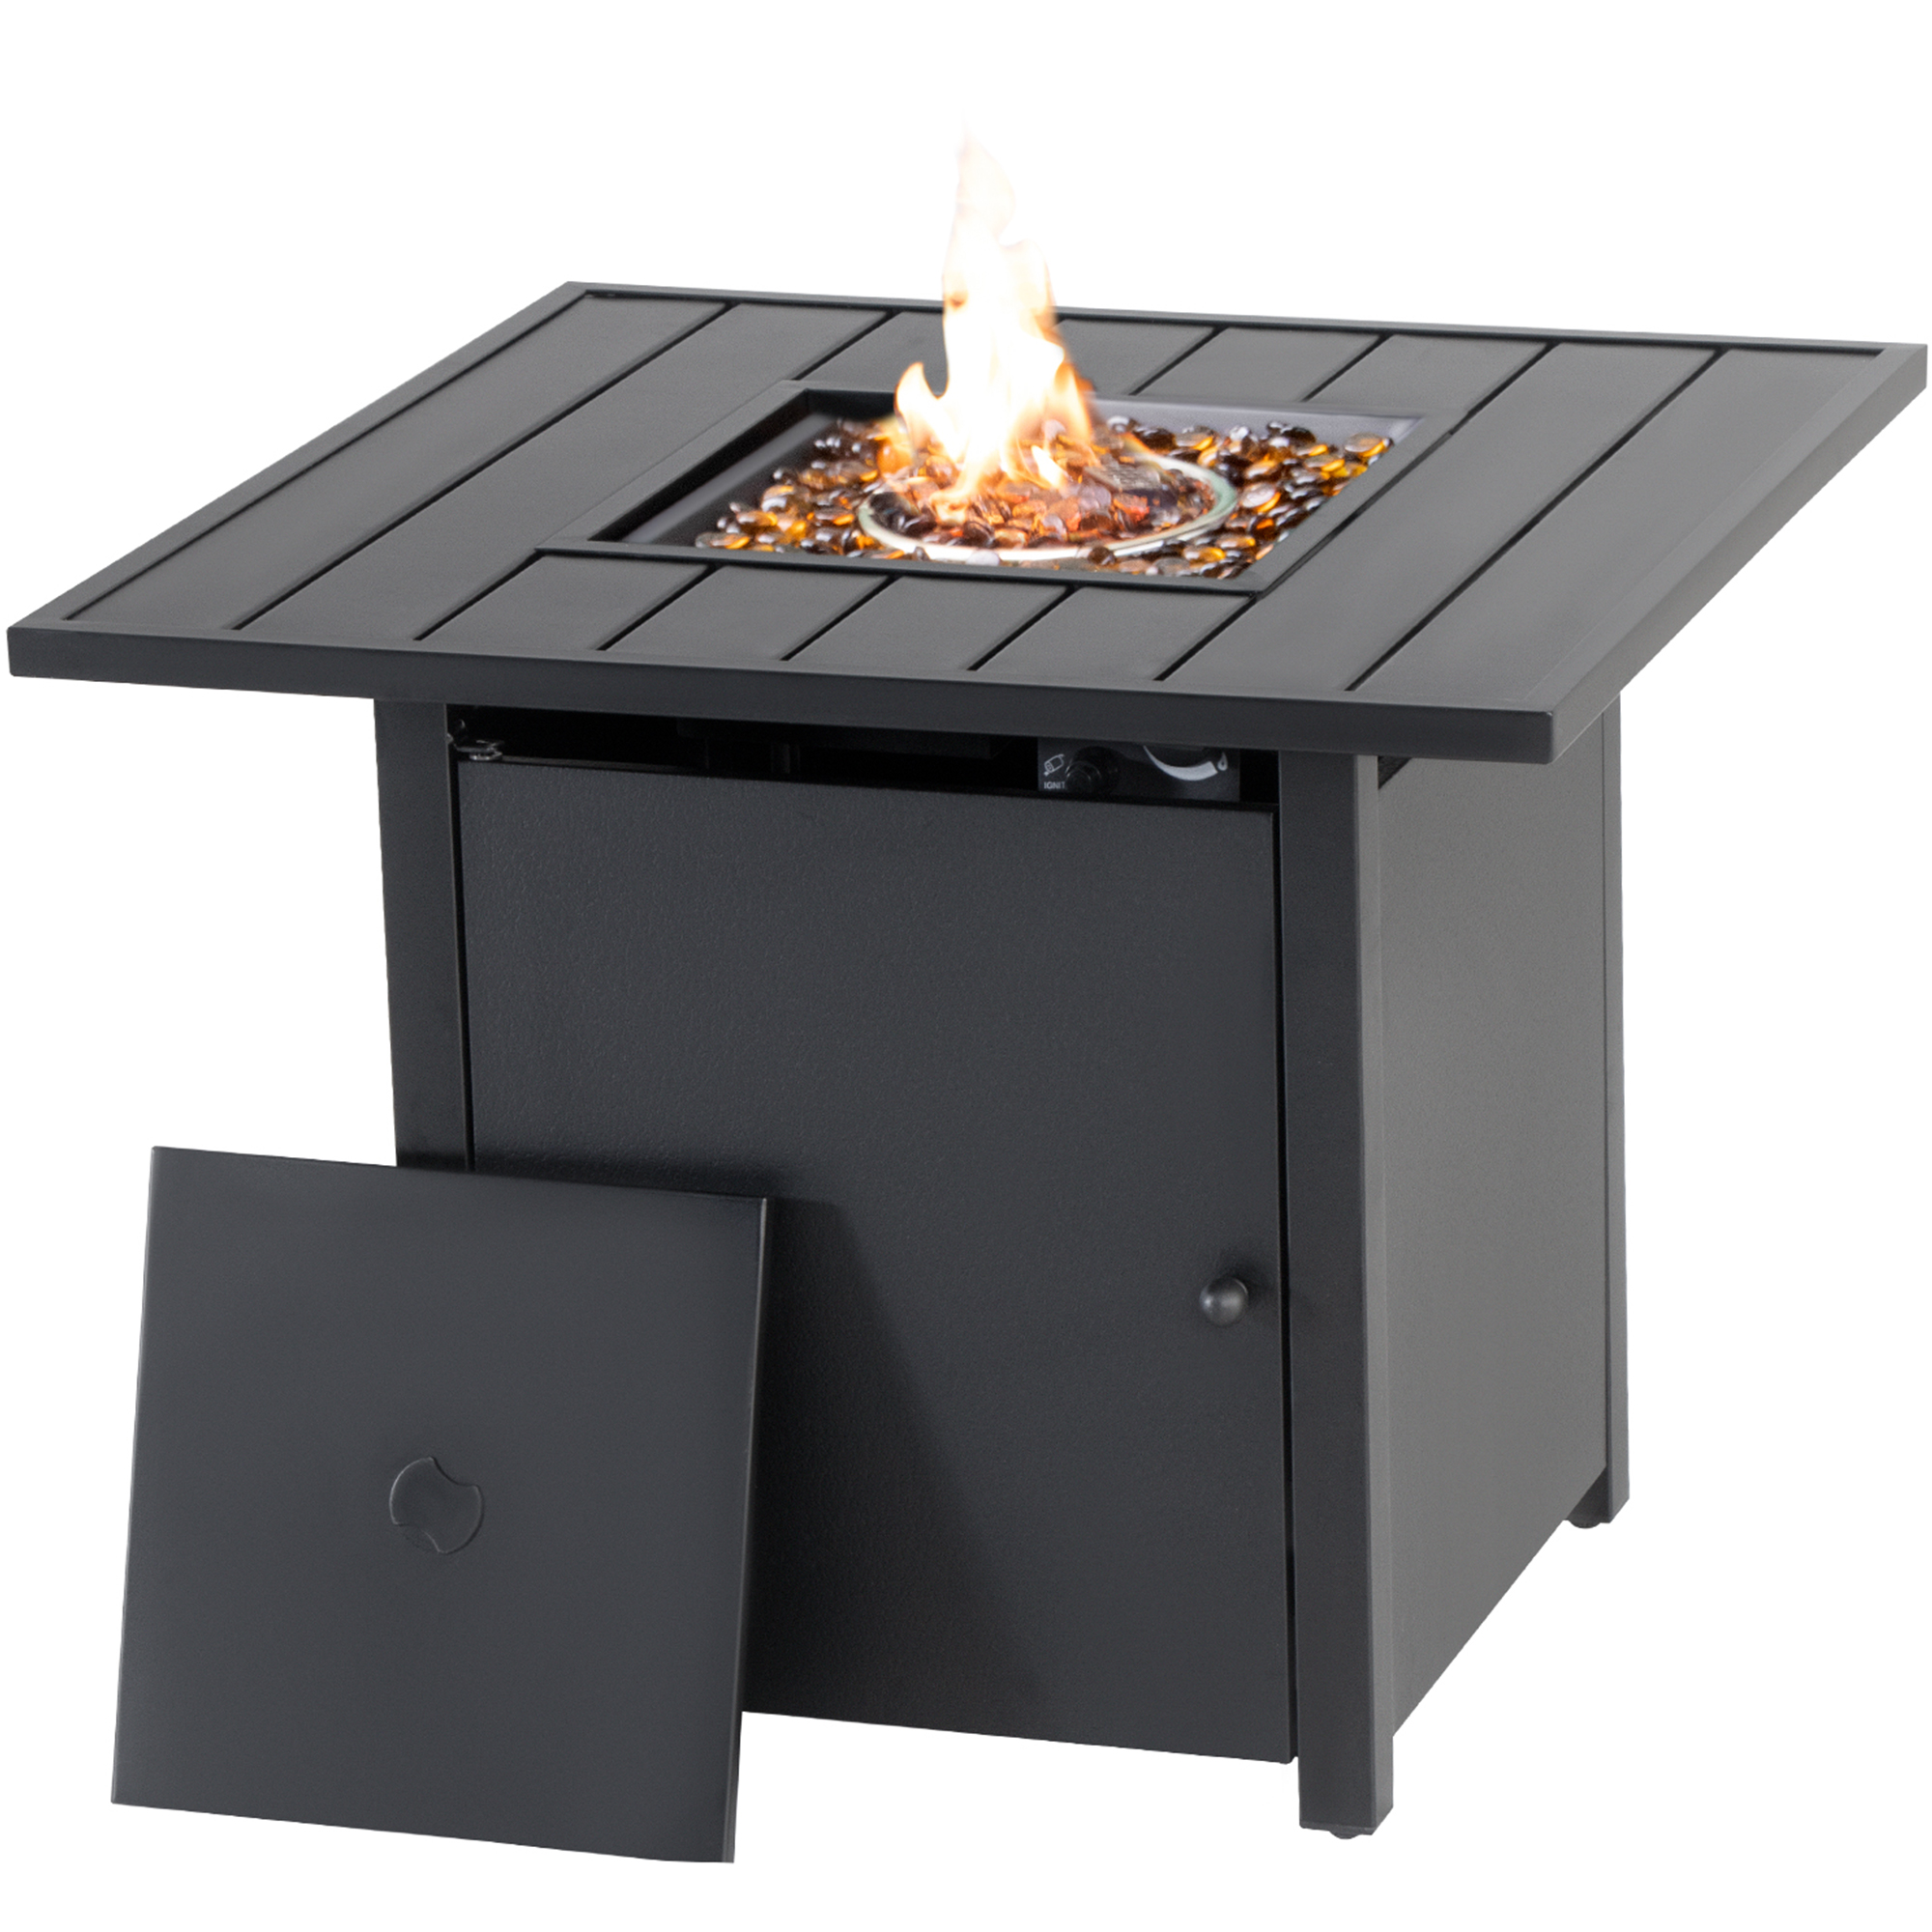 2022 LAUSAINT HOME 28 Inch Gas Propane Fire Pit Table,40000BTU Outdoor Auto-Ignition Fire Table,CSA Certification Patio Table with Lid for Backyard, Garden, Camping,Courtyard,Deck (Square-28 inch)-Boyel Living